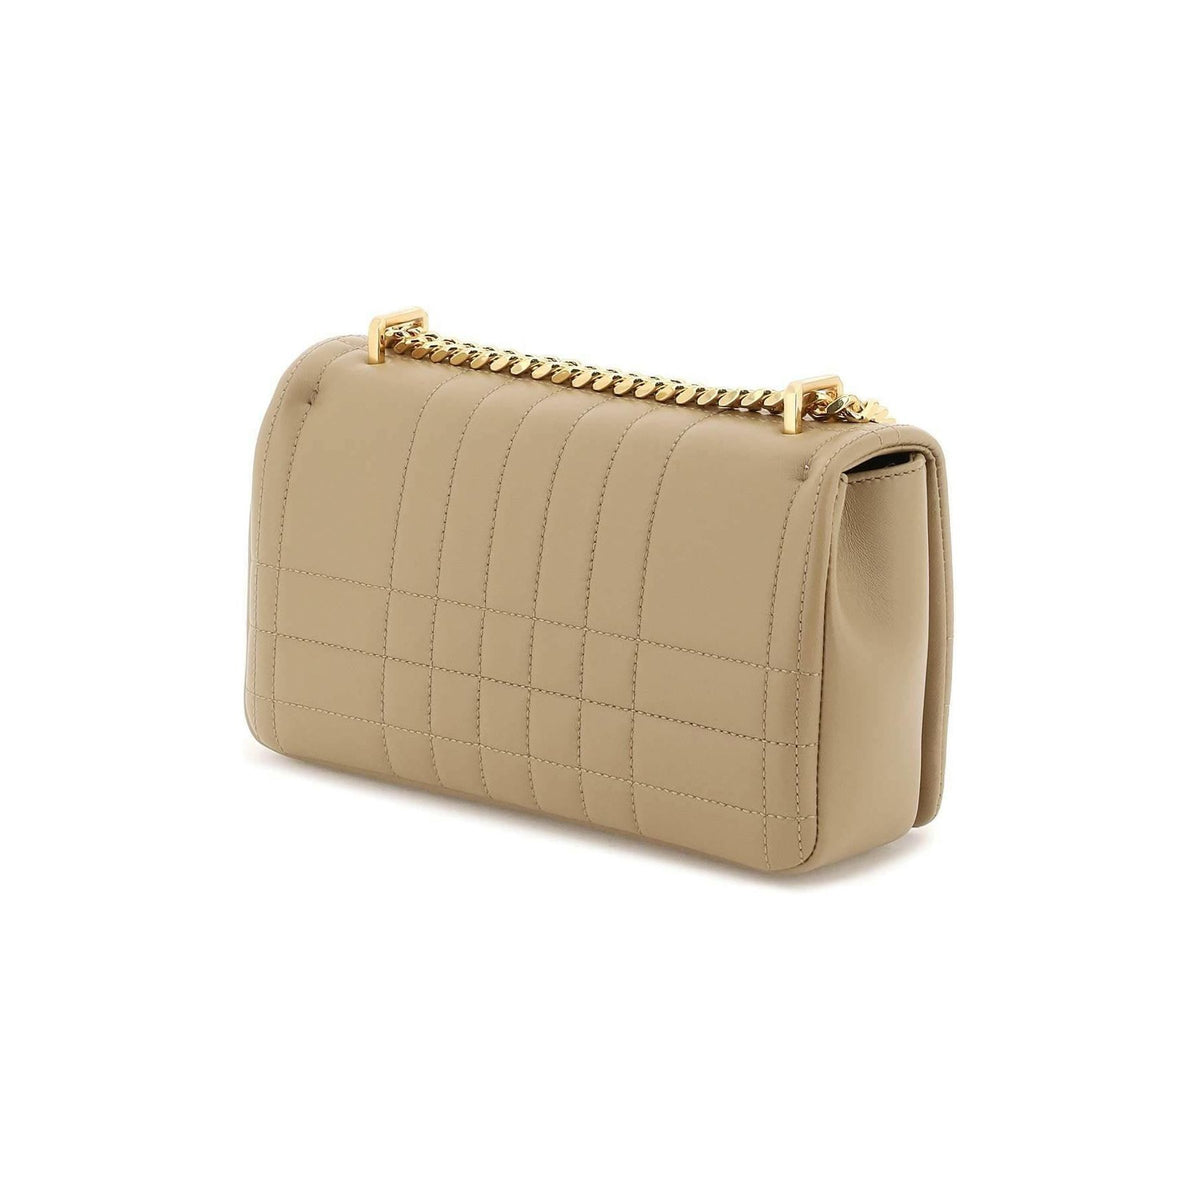 Oat Beige Quilted Leather Small Lola Bag BURBERRY JOHN JULIA.